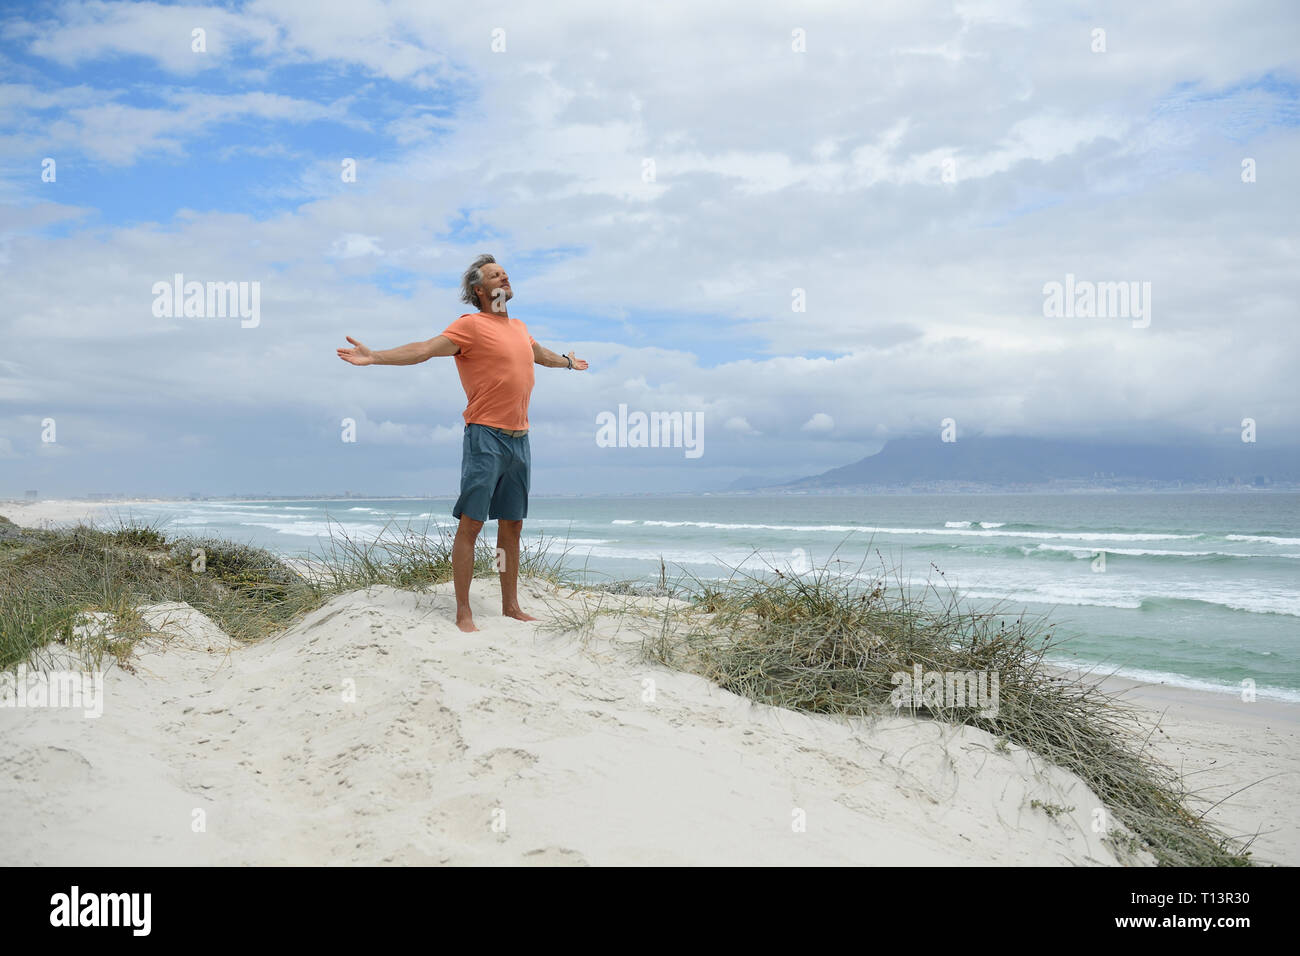 South Africa, man raising arms at Bloubergstrand Stock Photo